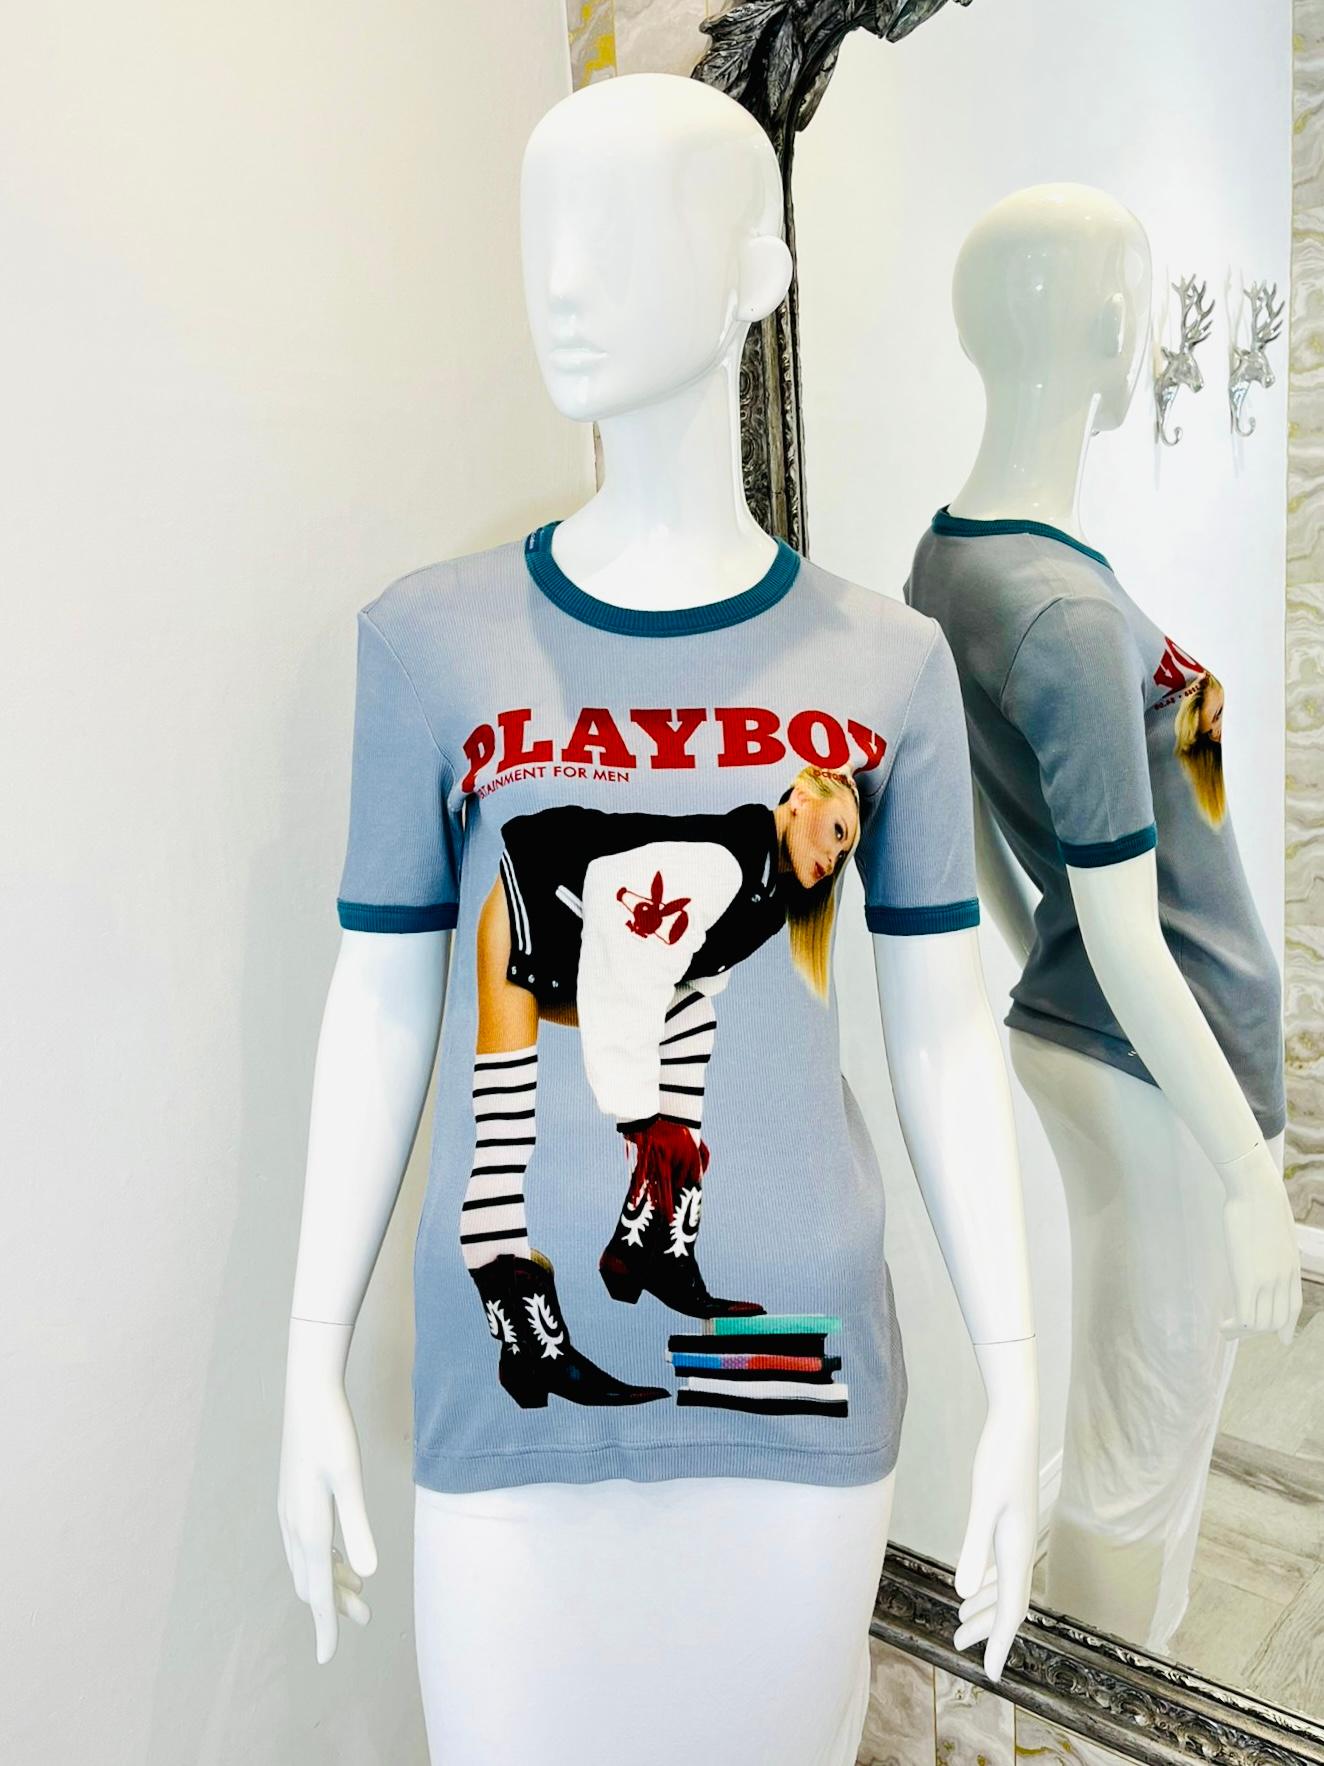 Dolce & Gabbana 'Playboy' T-Shirt - Unisex

Grey cotton ribbed top with green contrasting trim to the neckline and cuffs.

Printed 'Playboy' image to the front. Logo to neckline.

Size - 48IT

Condition - Very Good

Composition - Cotton (Label